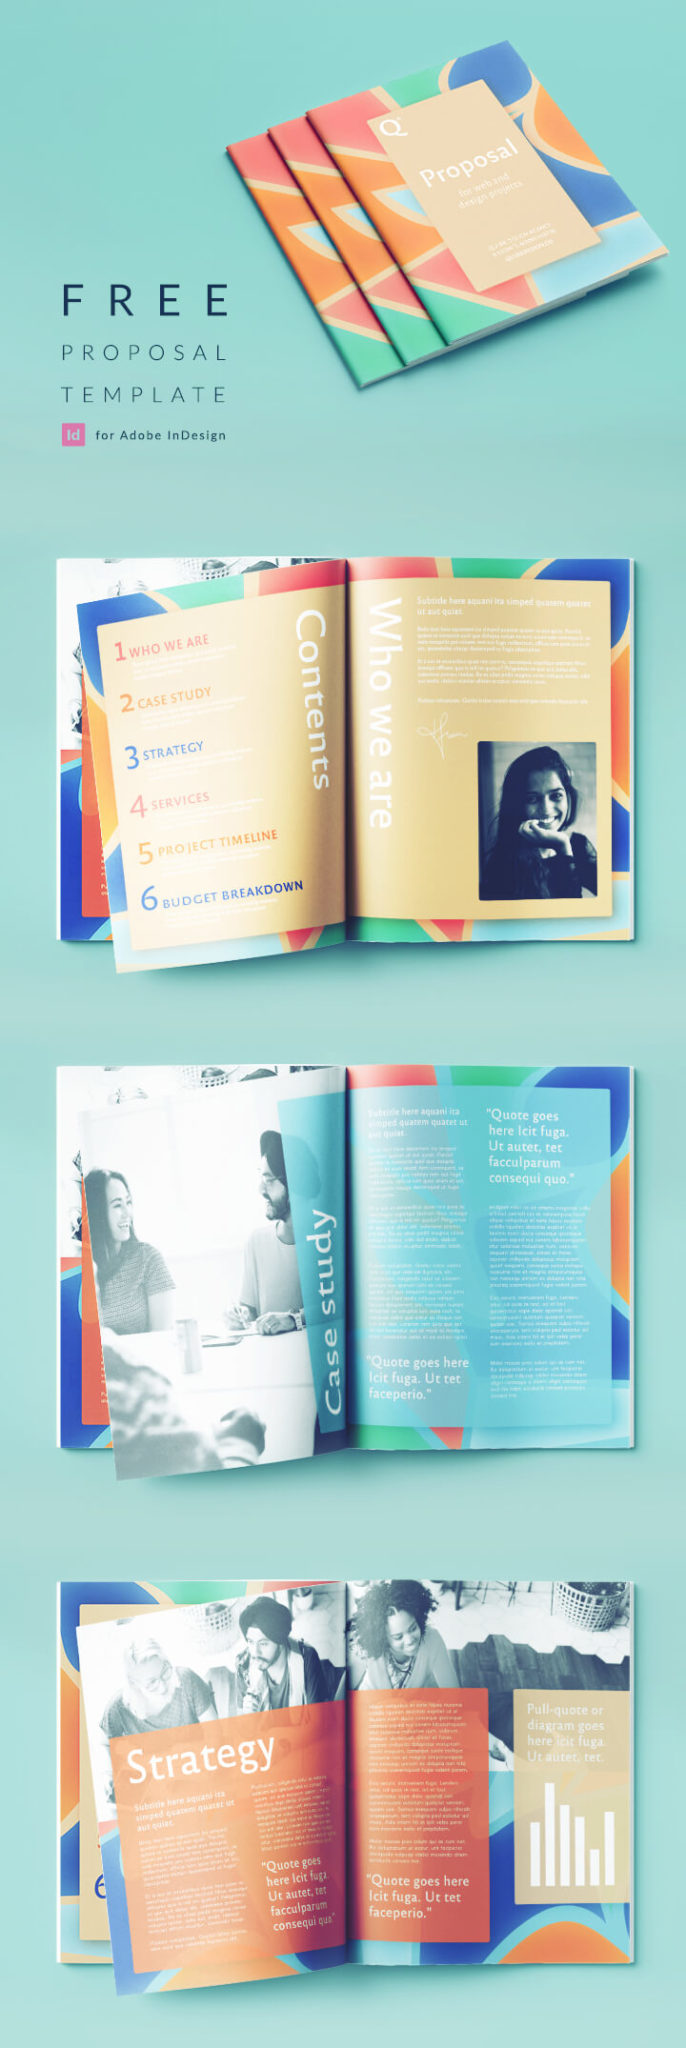 InDesign Proposal Template - Stylish, colorful InDesign proposal template, perfect for a creative or tech business. Free download.